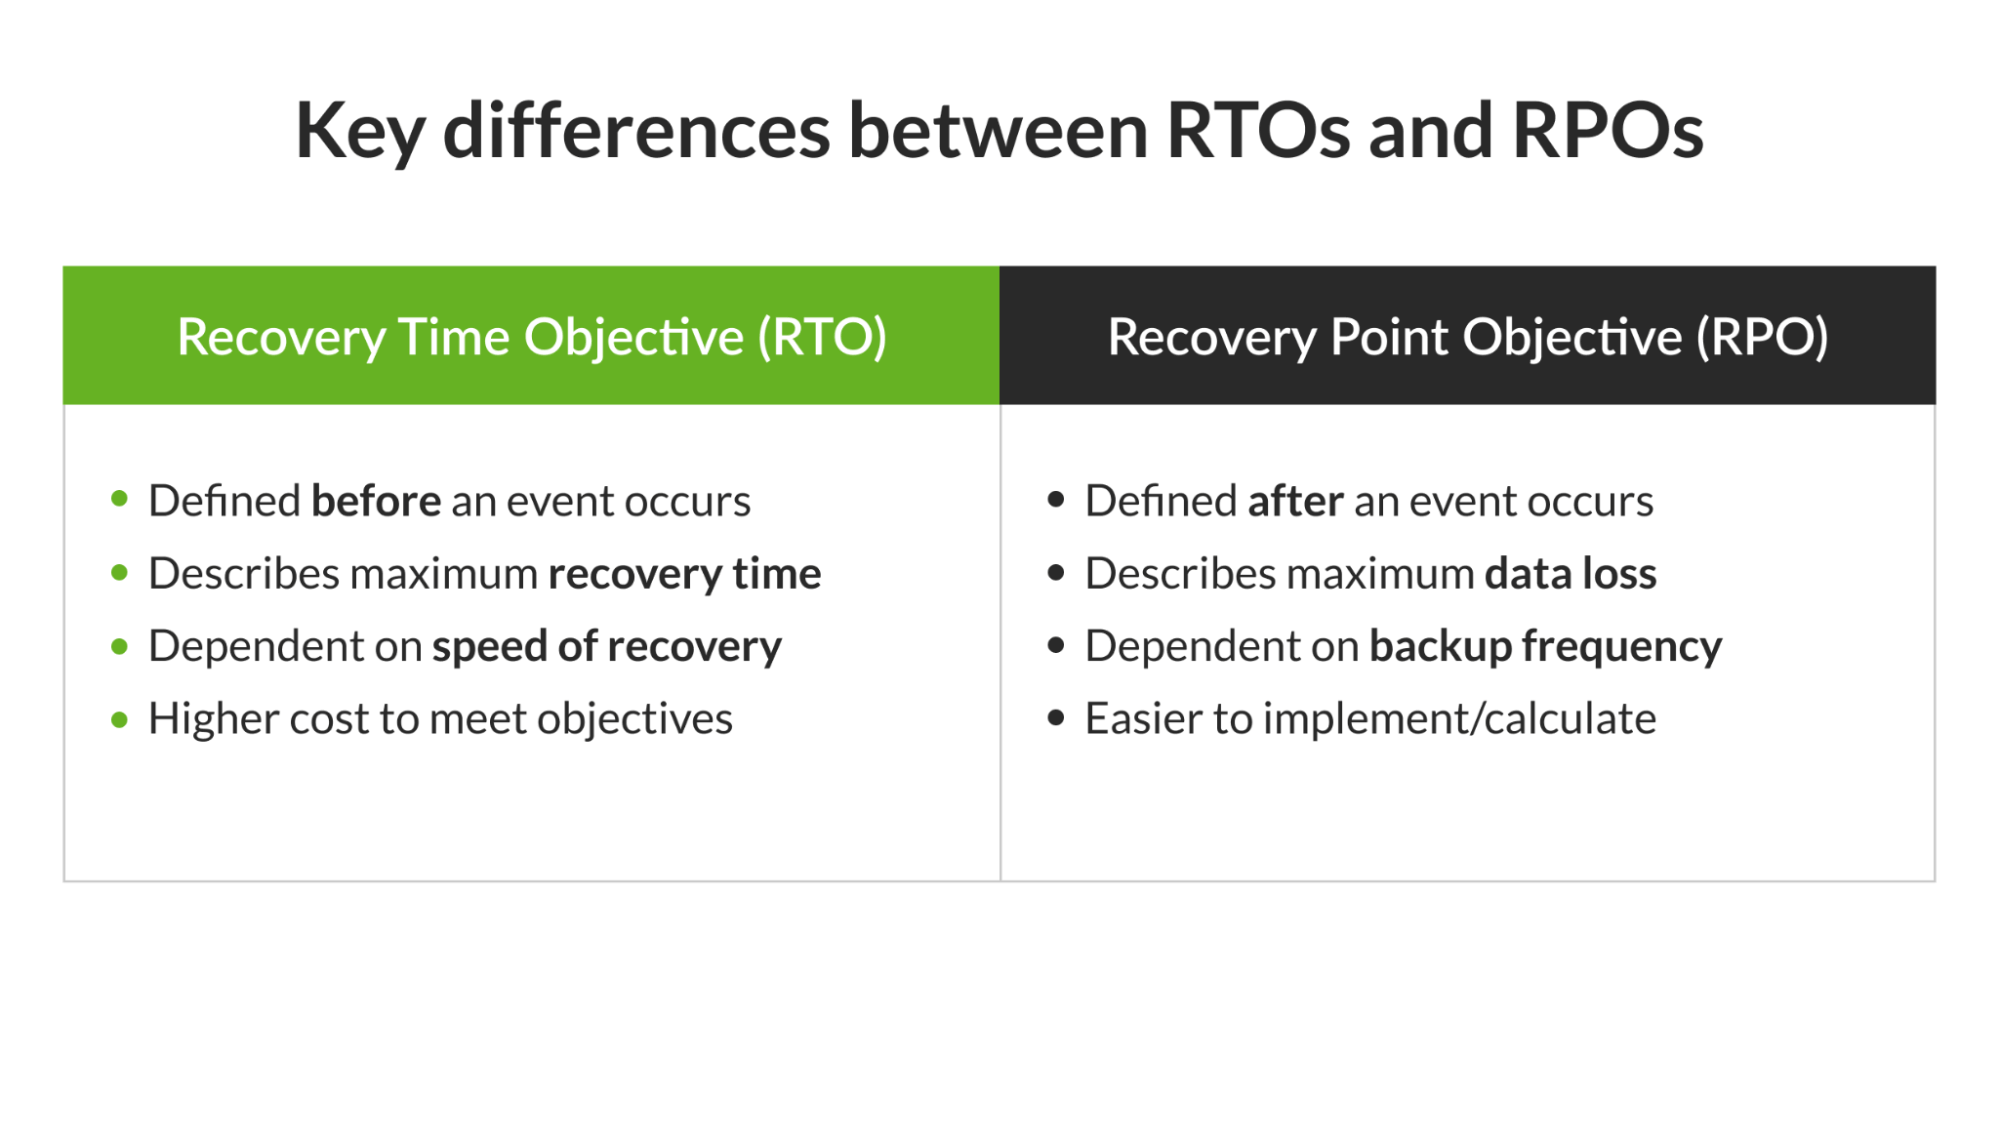 Key differences between RTOs and RPOs